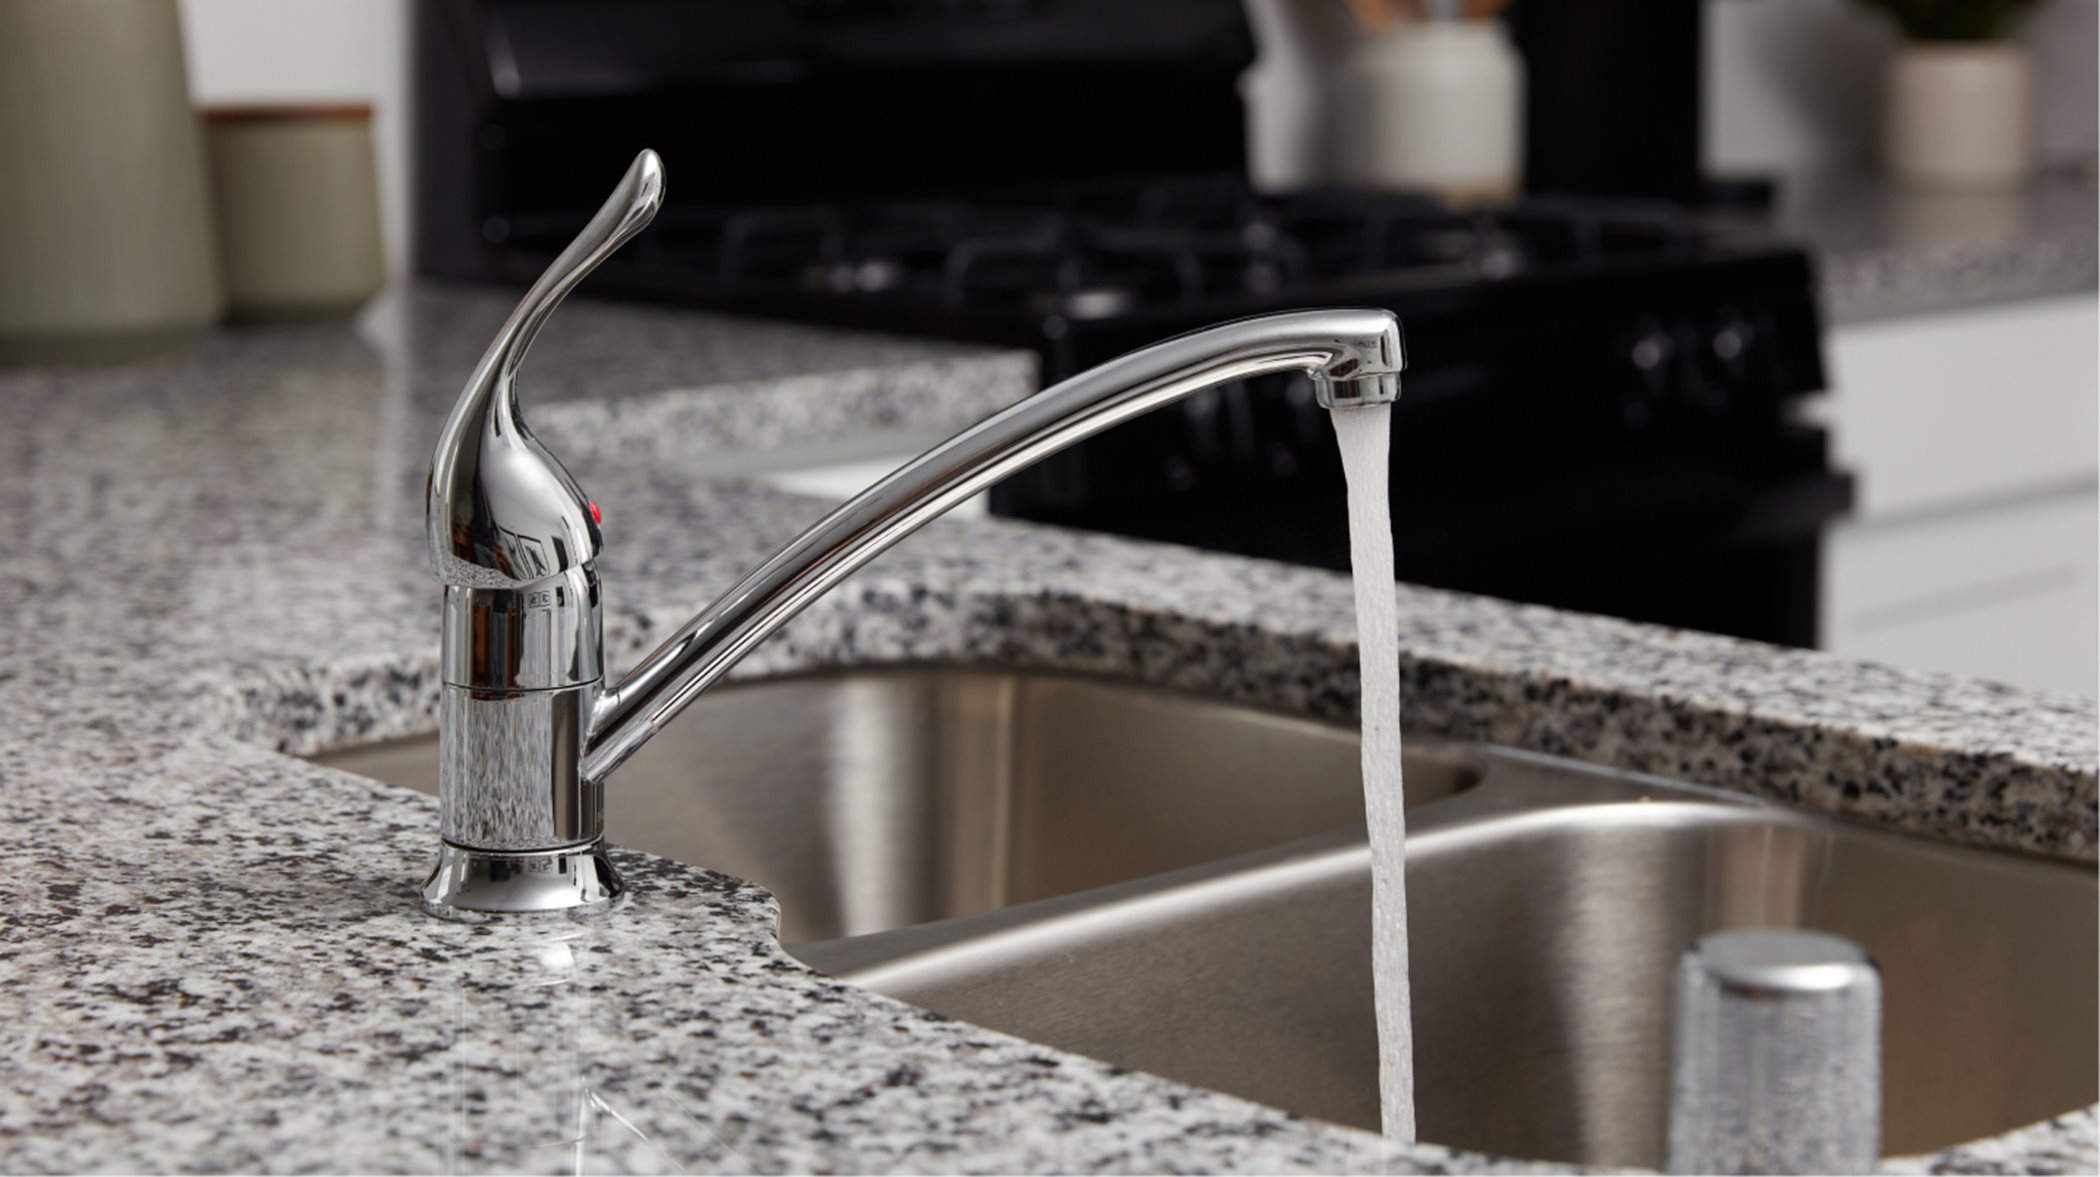 Stainless steel double-bowl kitchen sink